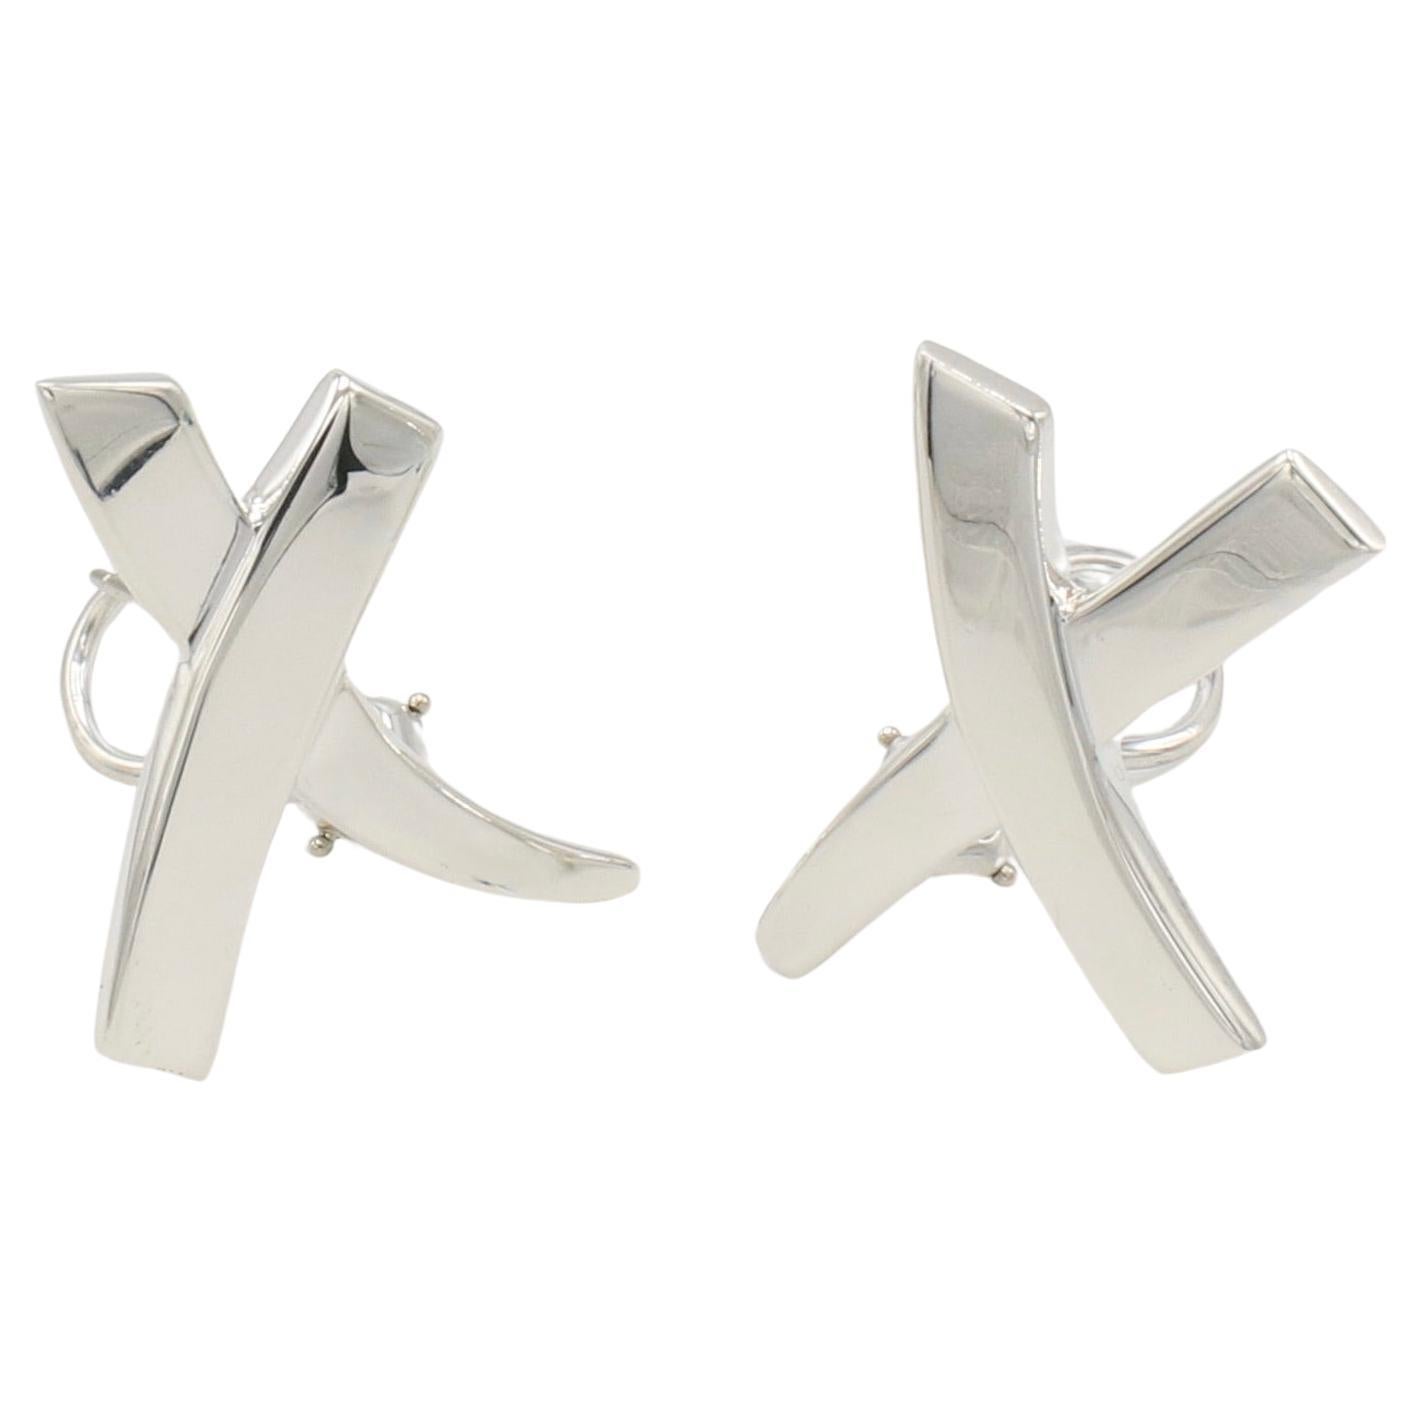 Tiffany & Co. Paloma Picasso Sterling Silver Large Graffiti X Earrings 
Metal: Sterling silver 925
Weight: 10.3 grams
Dimensions: 18 x 26mm
Signed: ©Tiffany & Co. Paloma Picasso 925
Backs: Lever backs with posts
Note: Hook for a drop to be attached